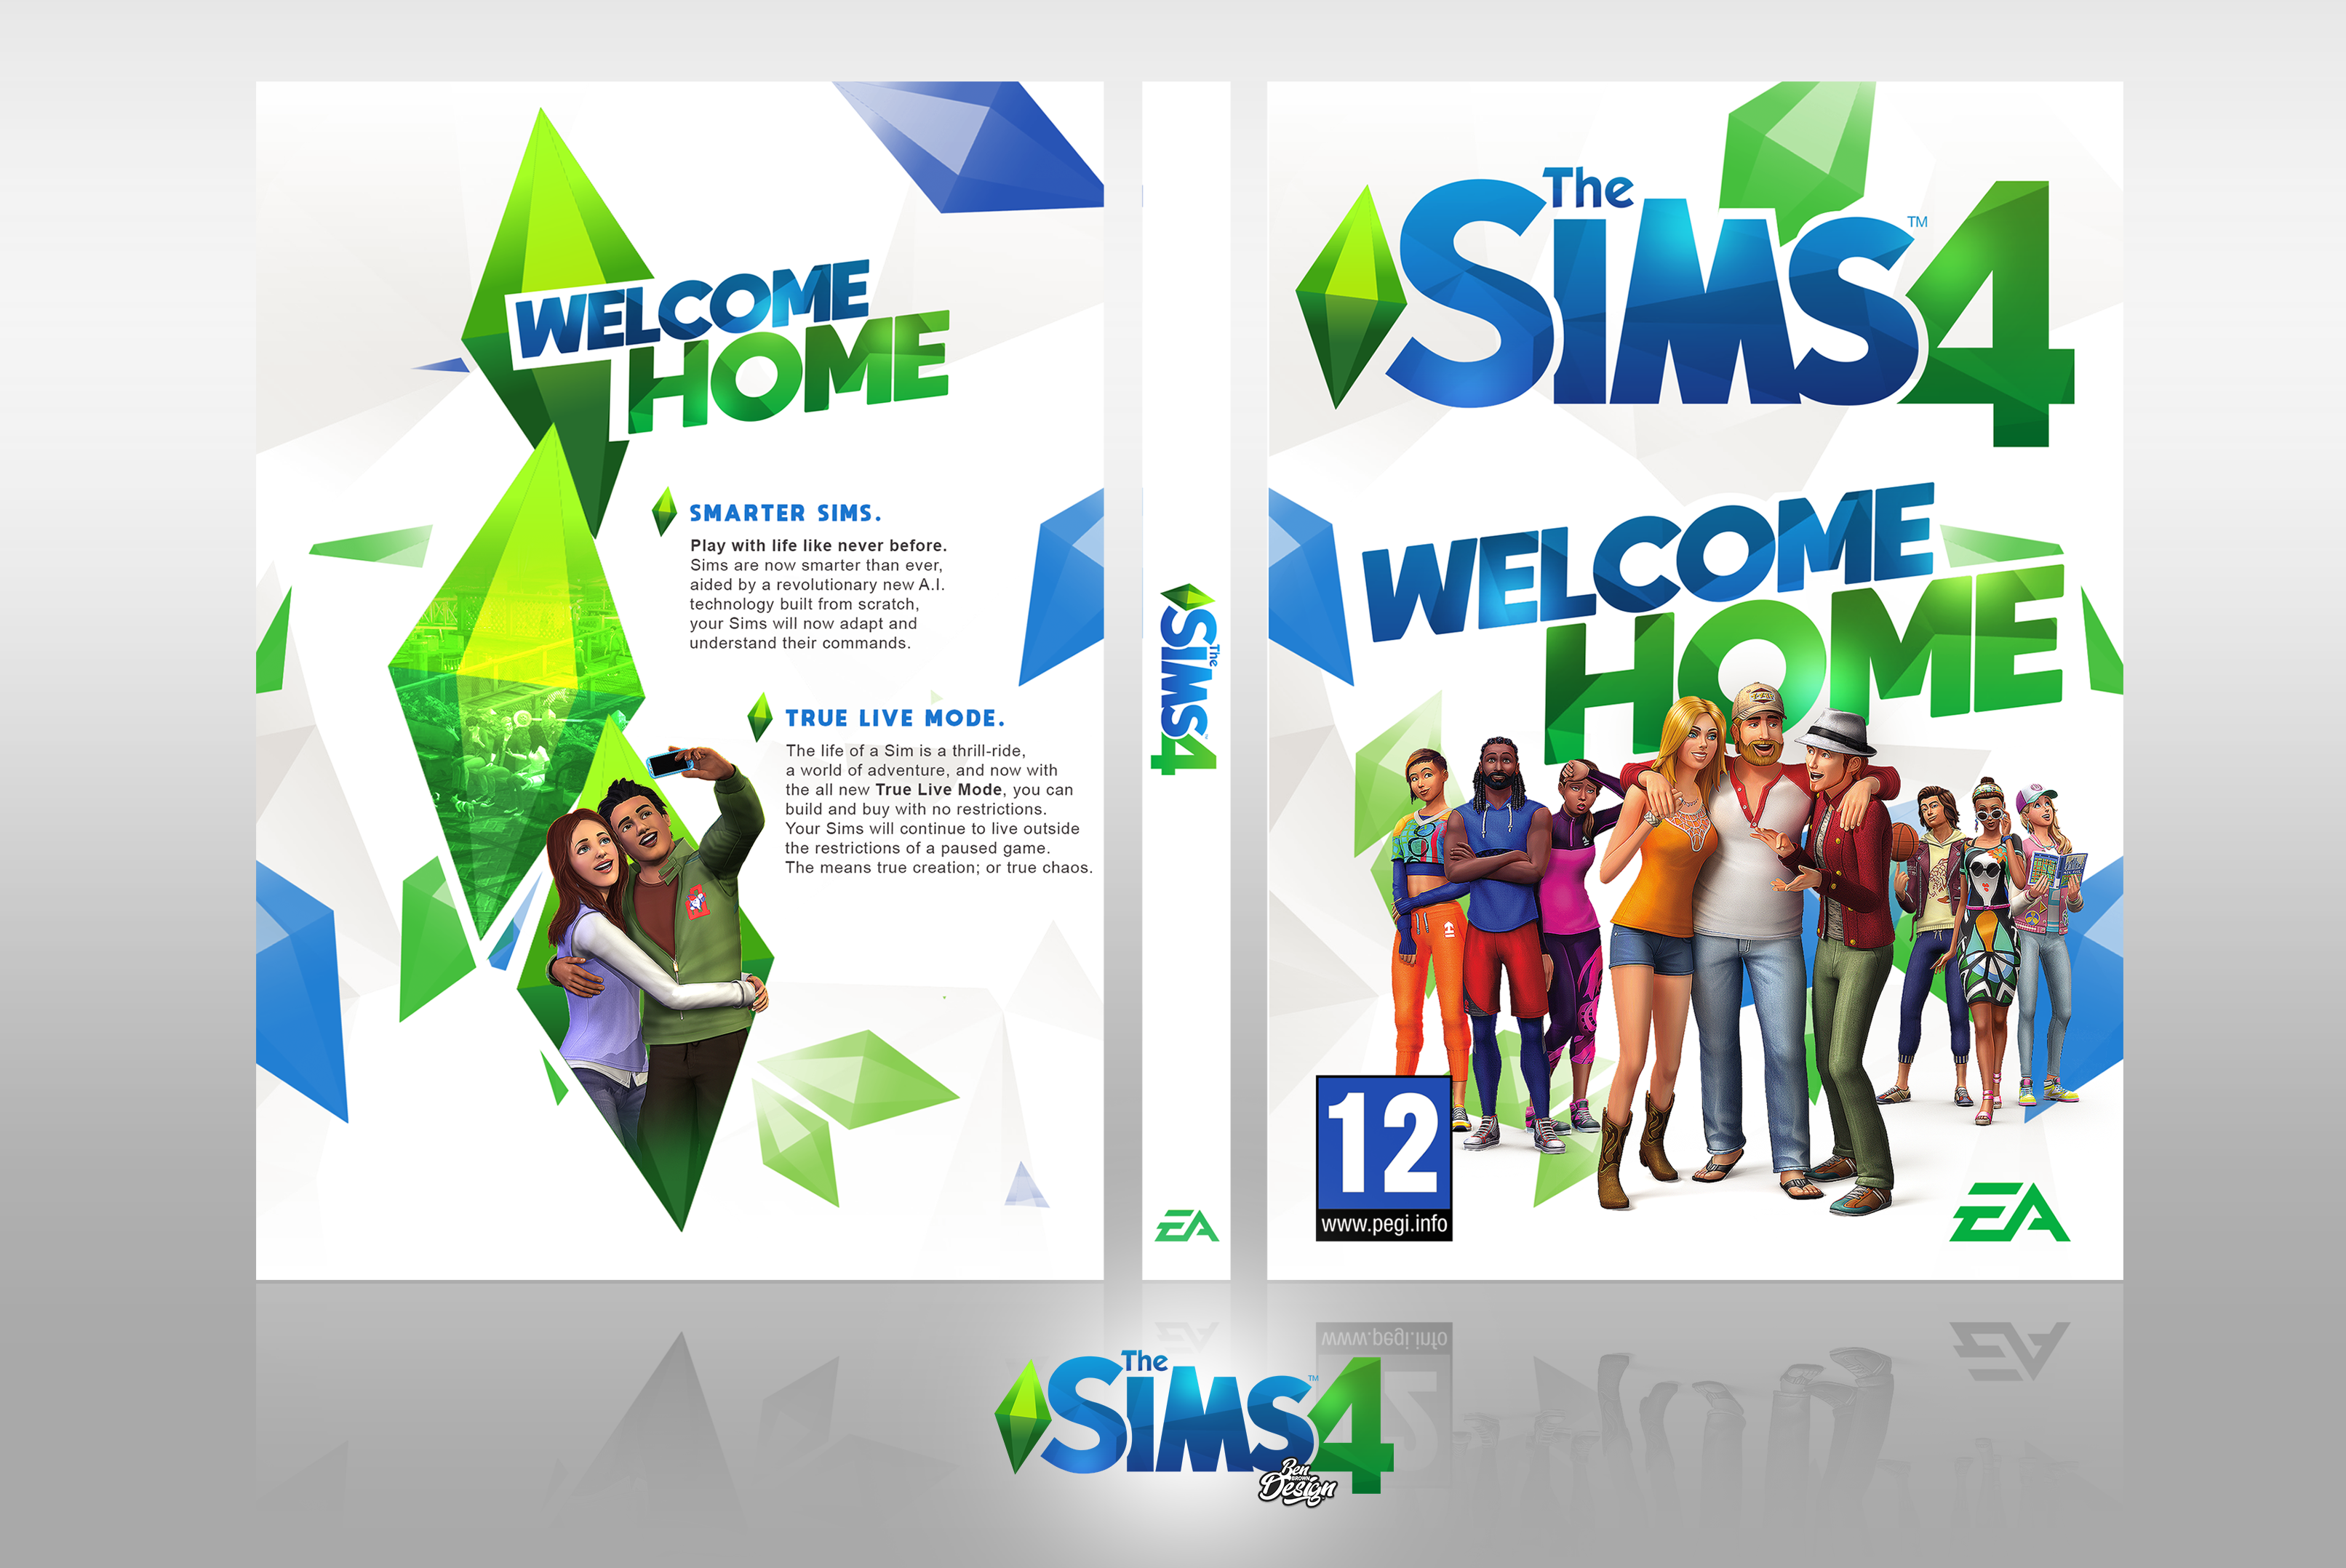 The Sims 4 box cover